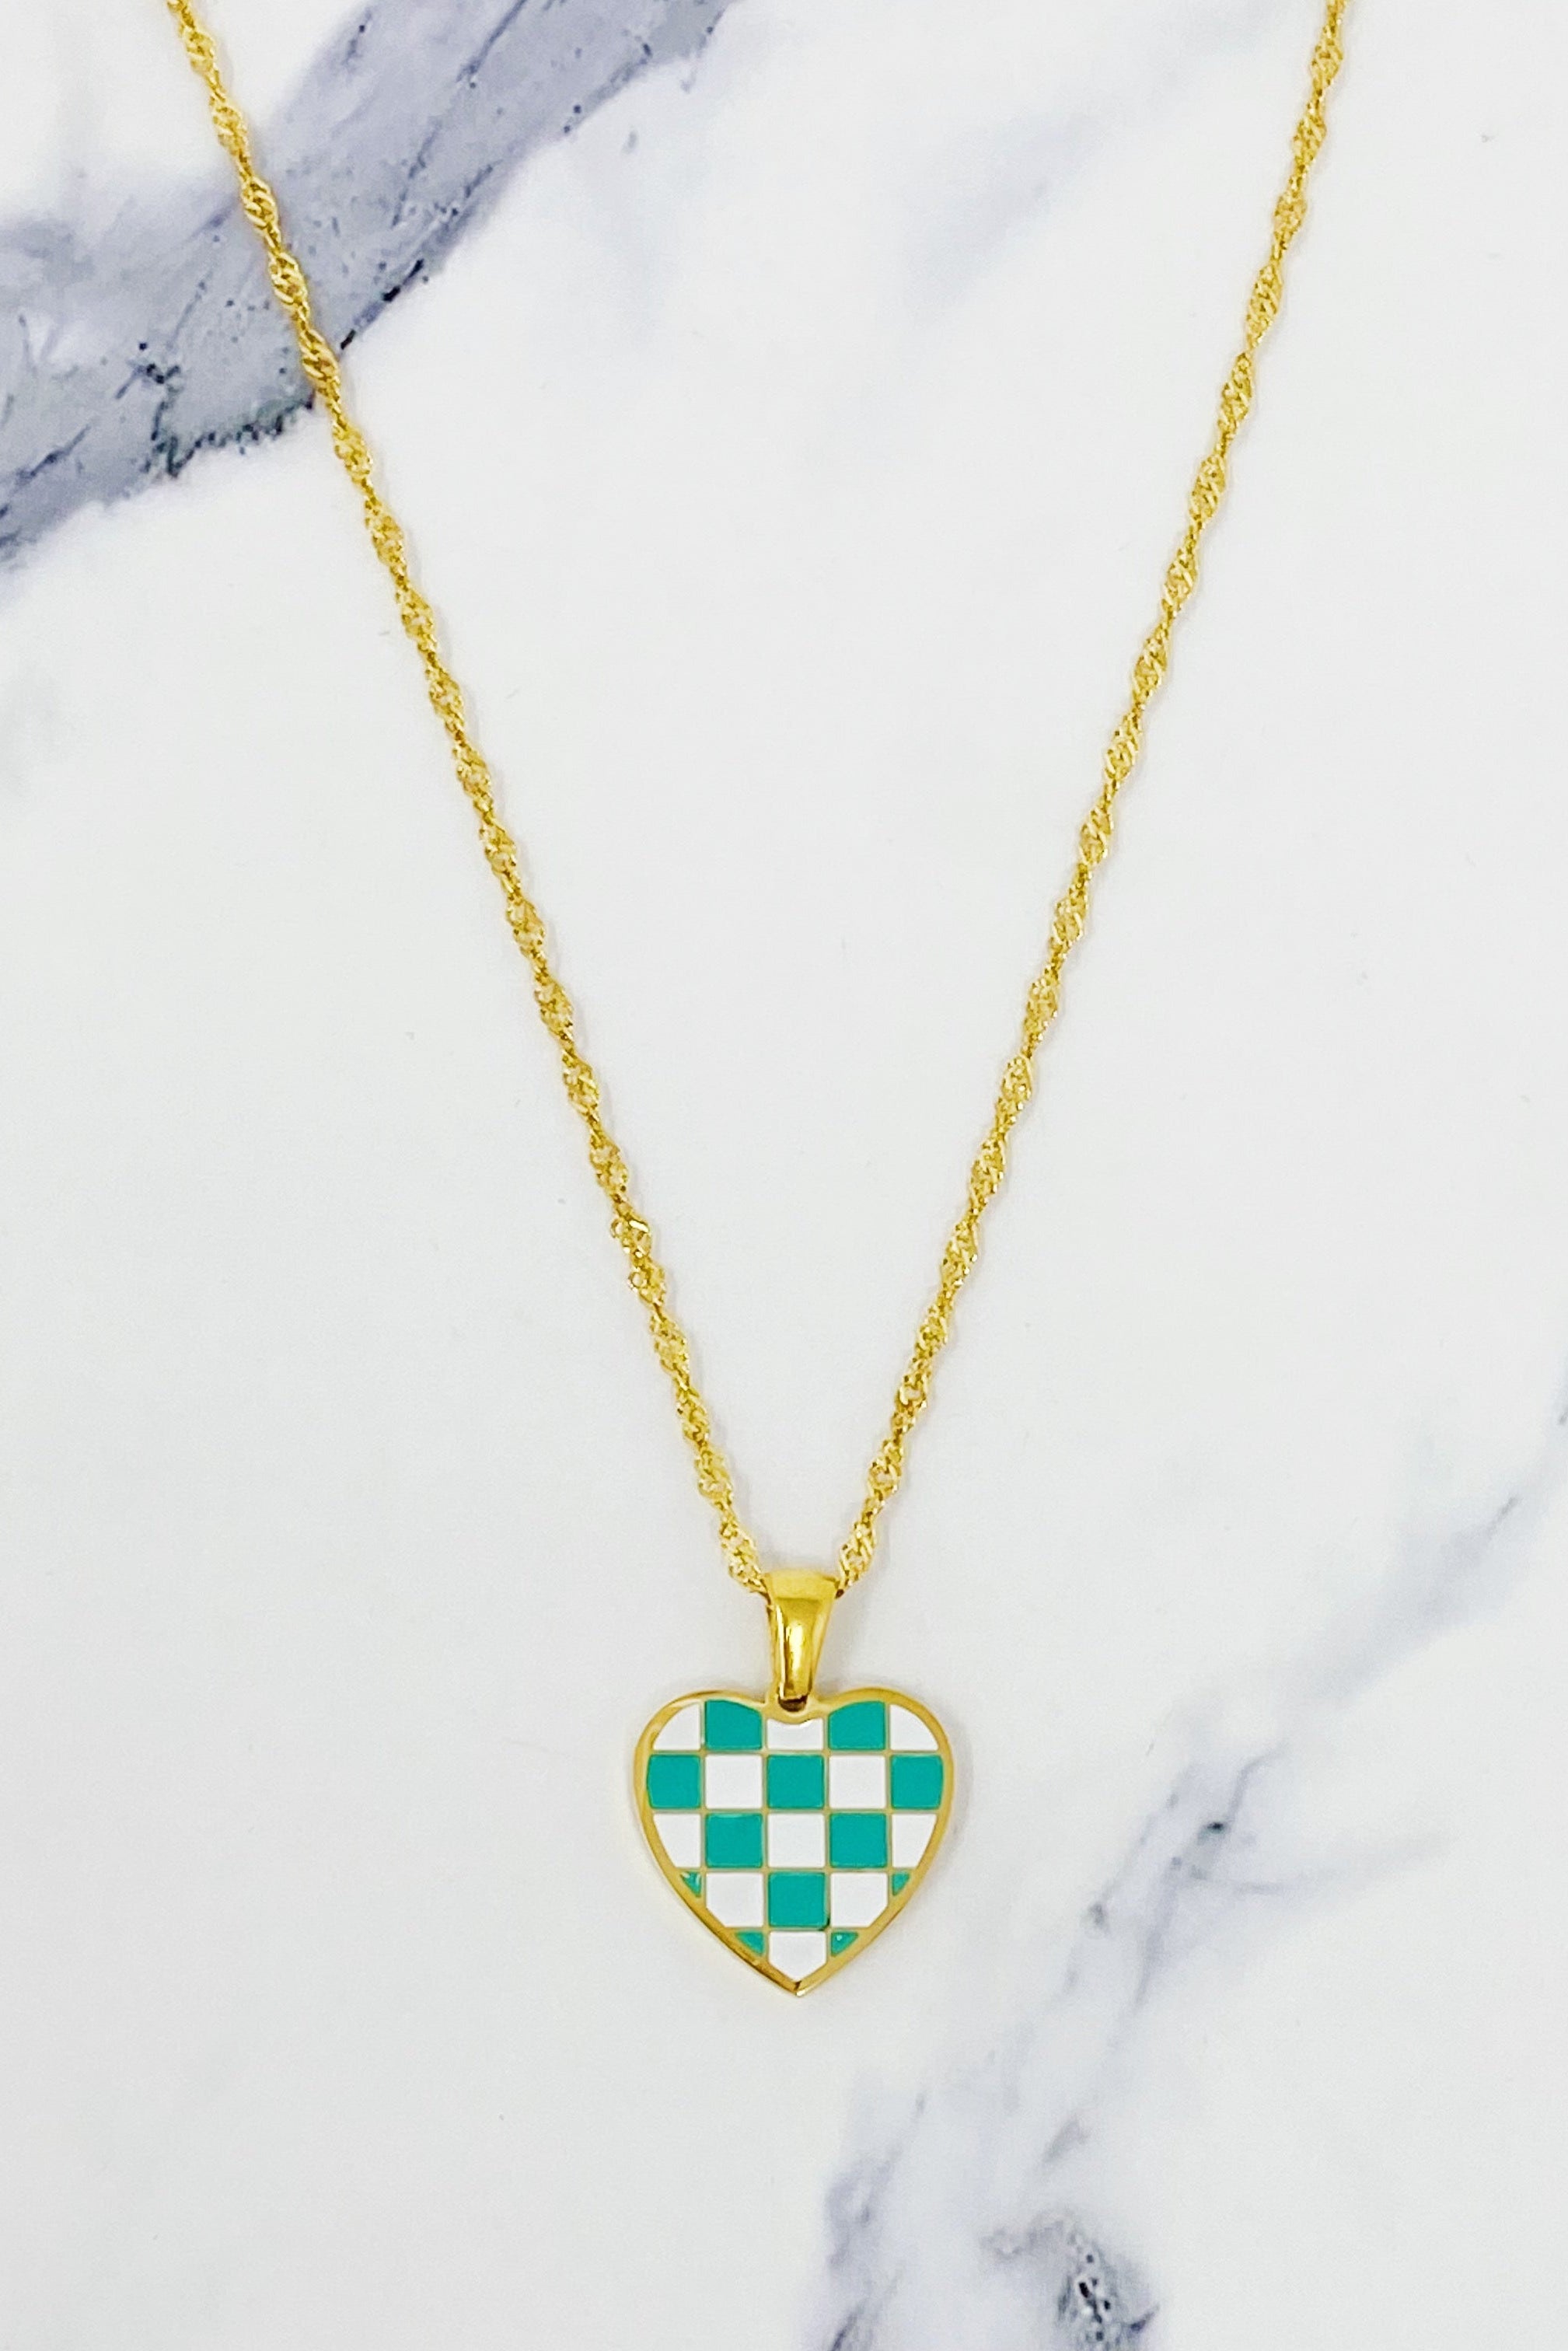 Checkered Heart Necklace Ellisonyoung.com